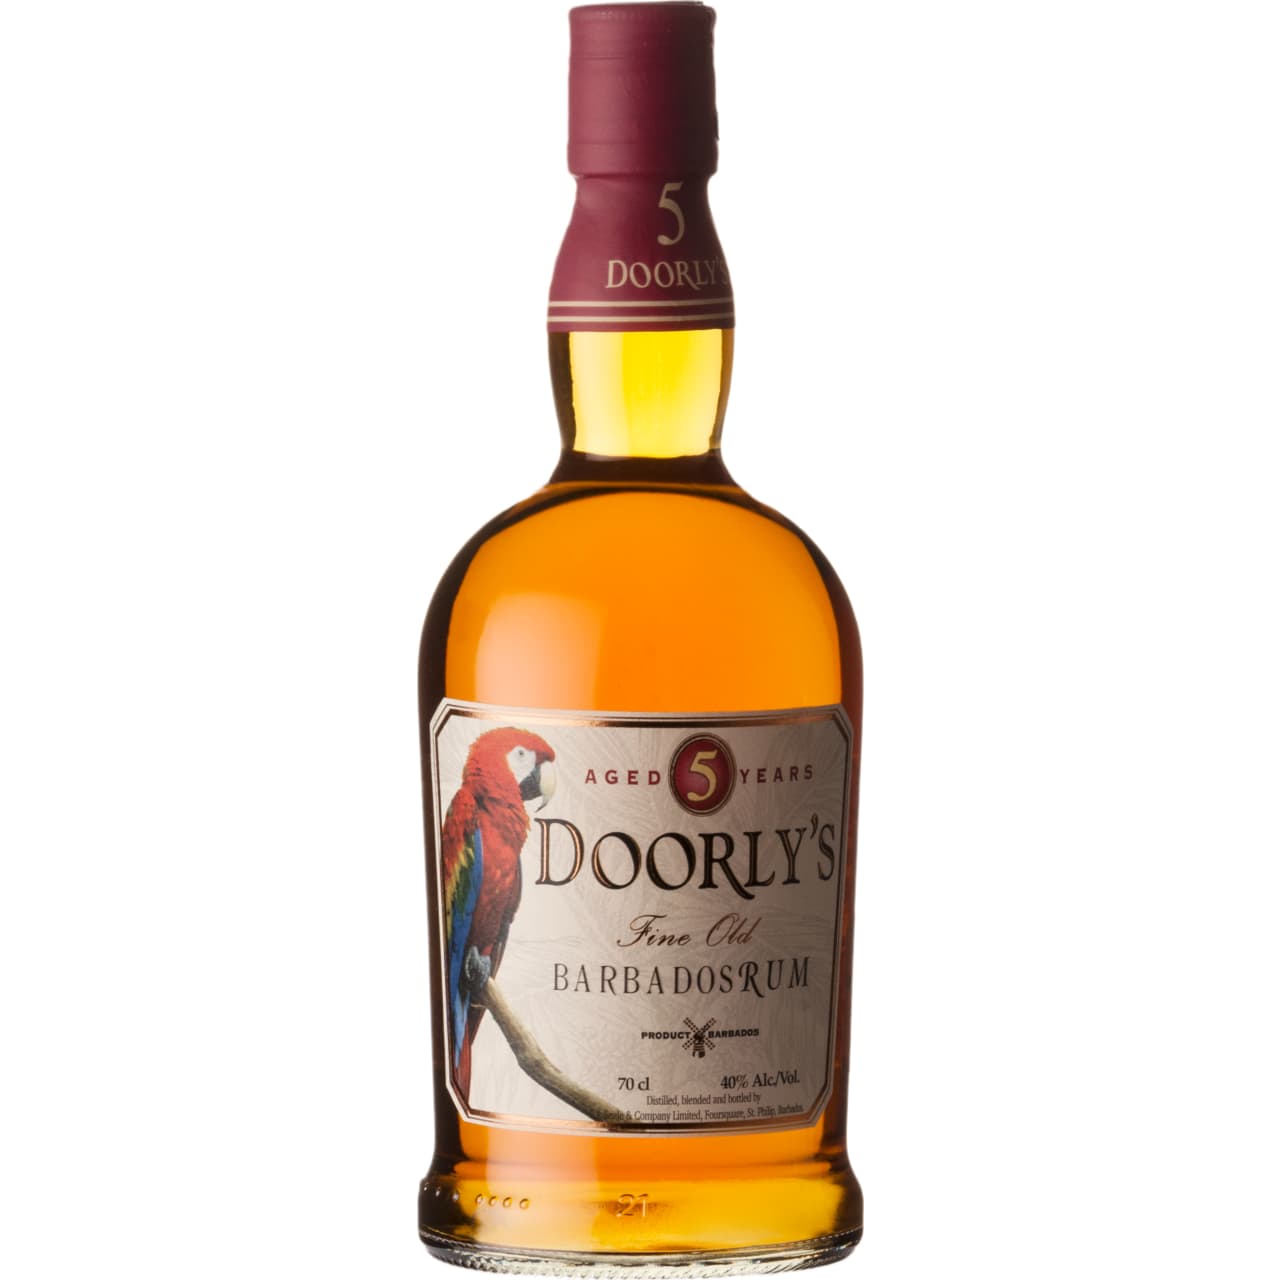 A vibrant entry leads to an evolving palate of fruit, toasted coconut and oak notes.